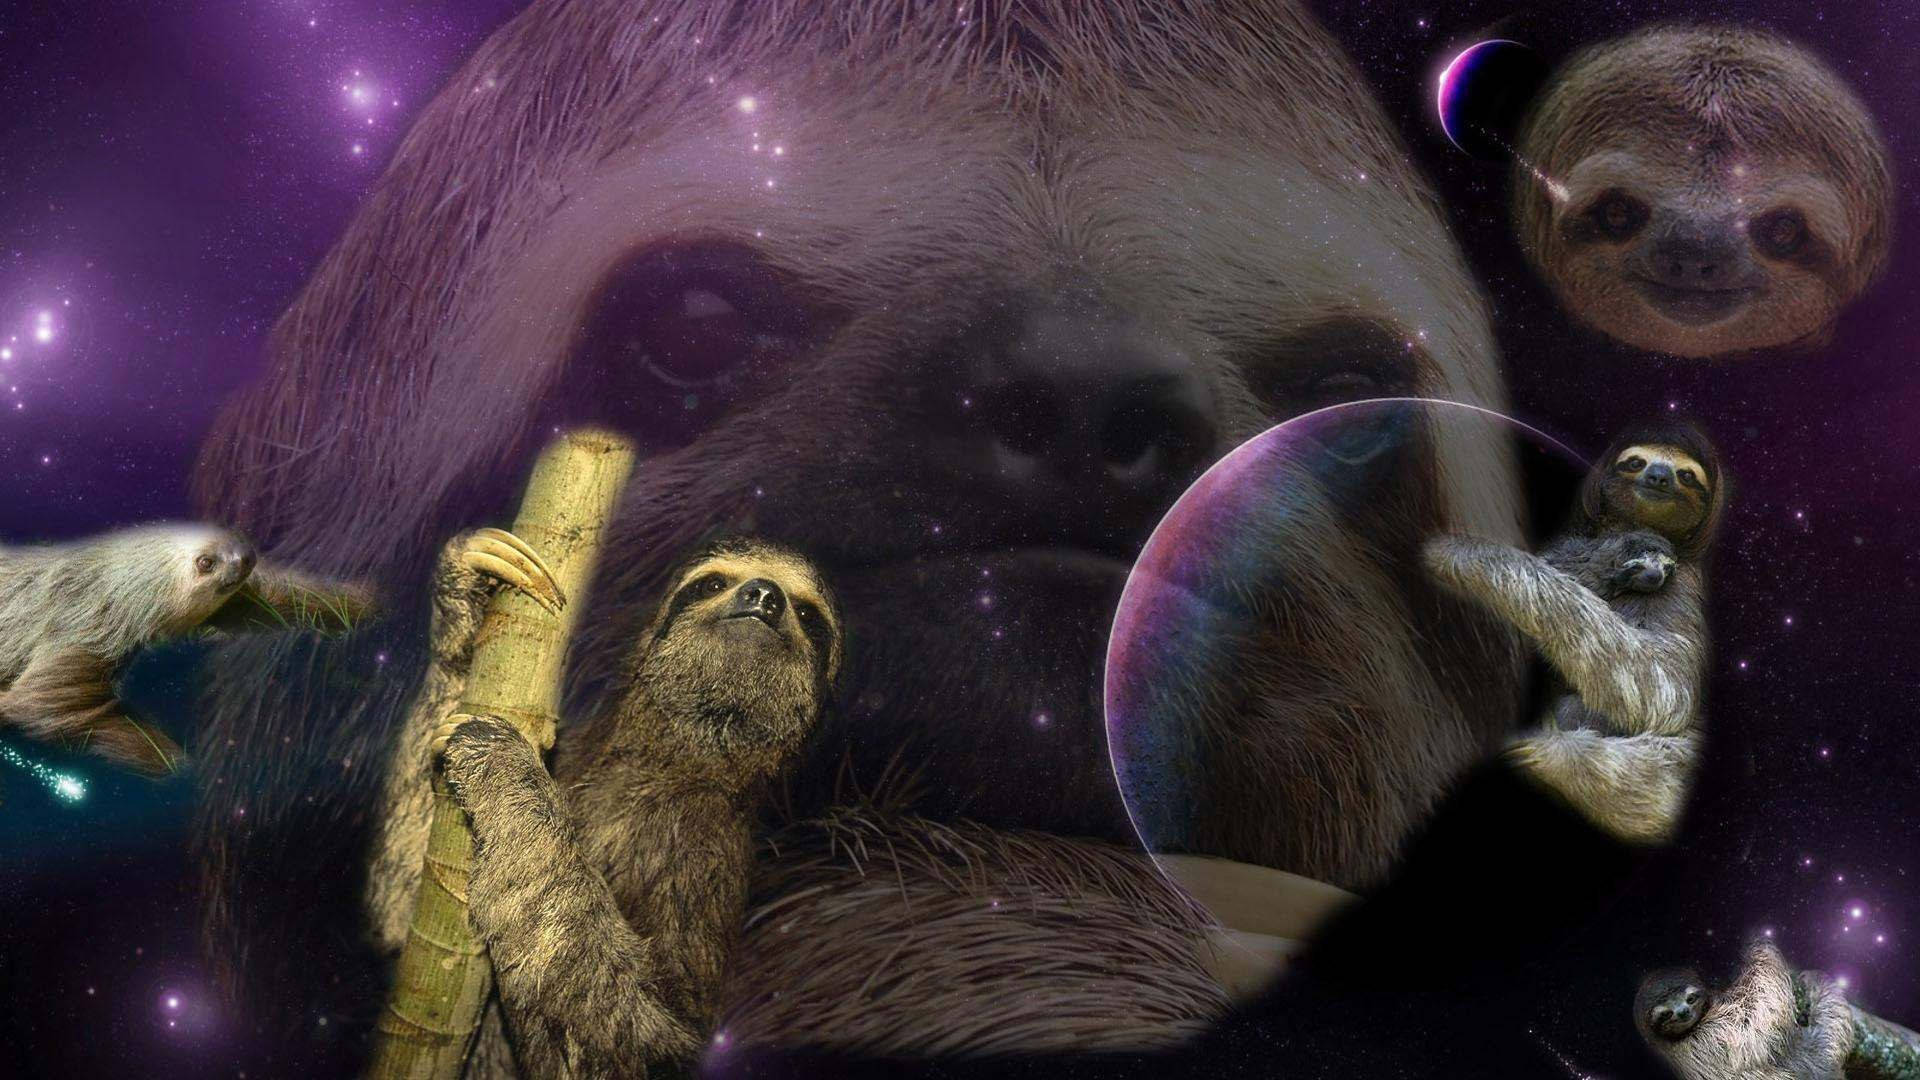 Weird Sloth In The Universe